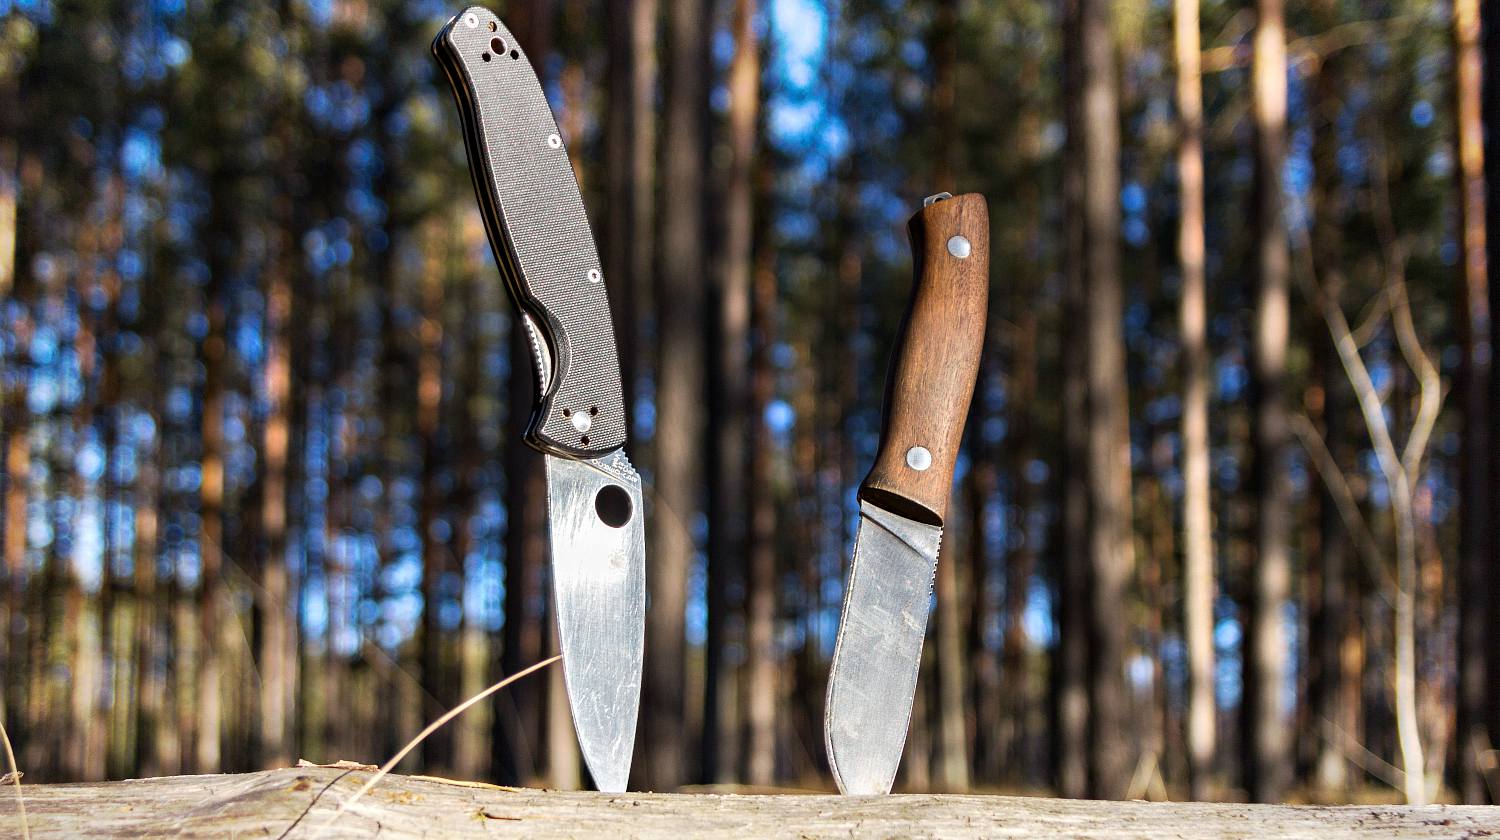 Featured | Two hunting knives inserted in wood | Breakthrough: How To Sharpen A Knife Without A Sharpener